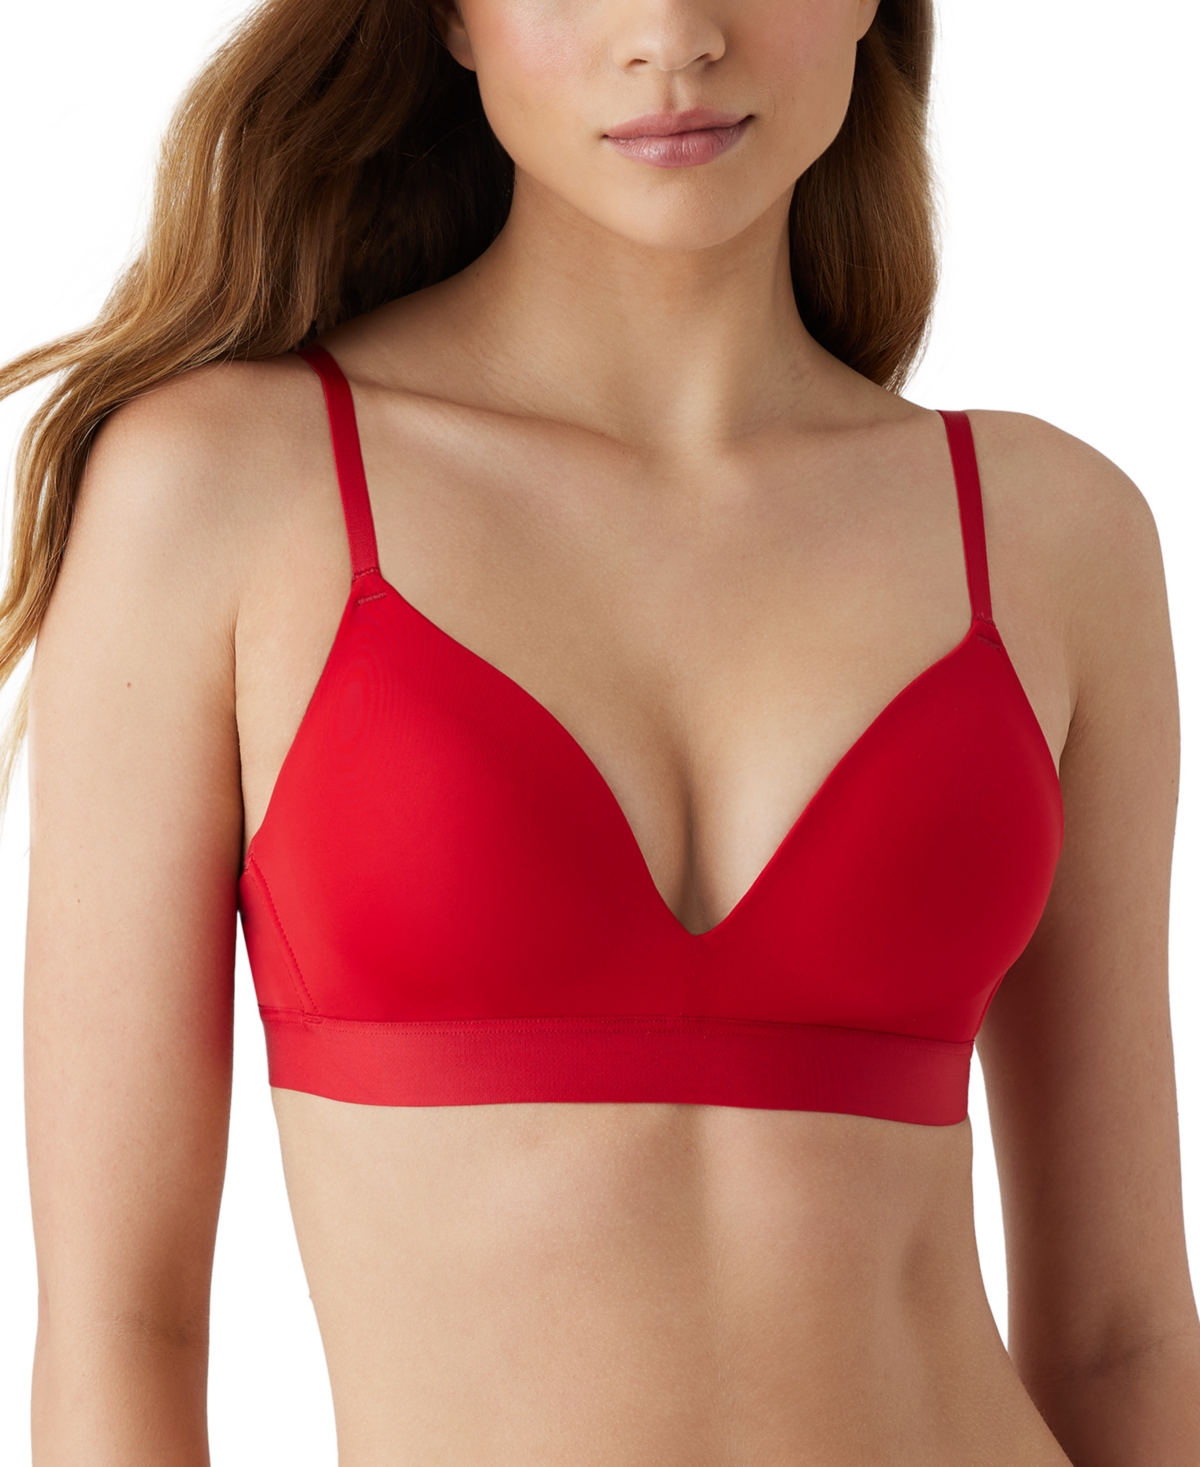 Women's Opening Act Wire-Free Contour Bra 956227 - Faience